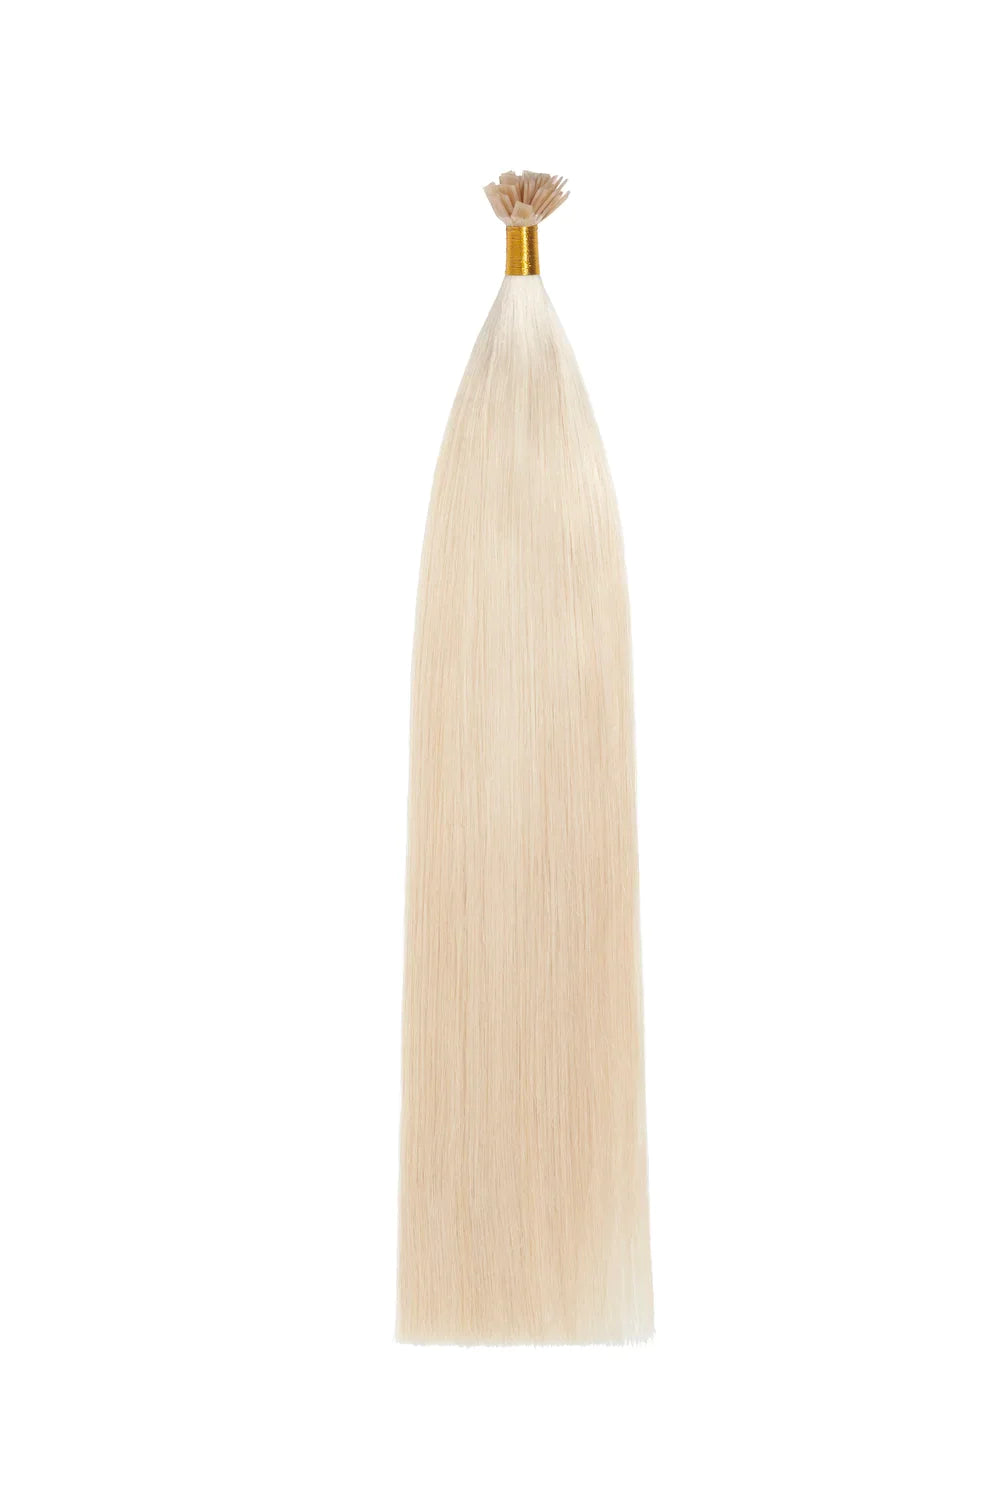 Lightest Blonde (#60) Remy Royale Flat Tip Hair Extensions